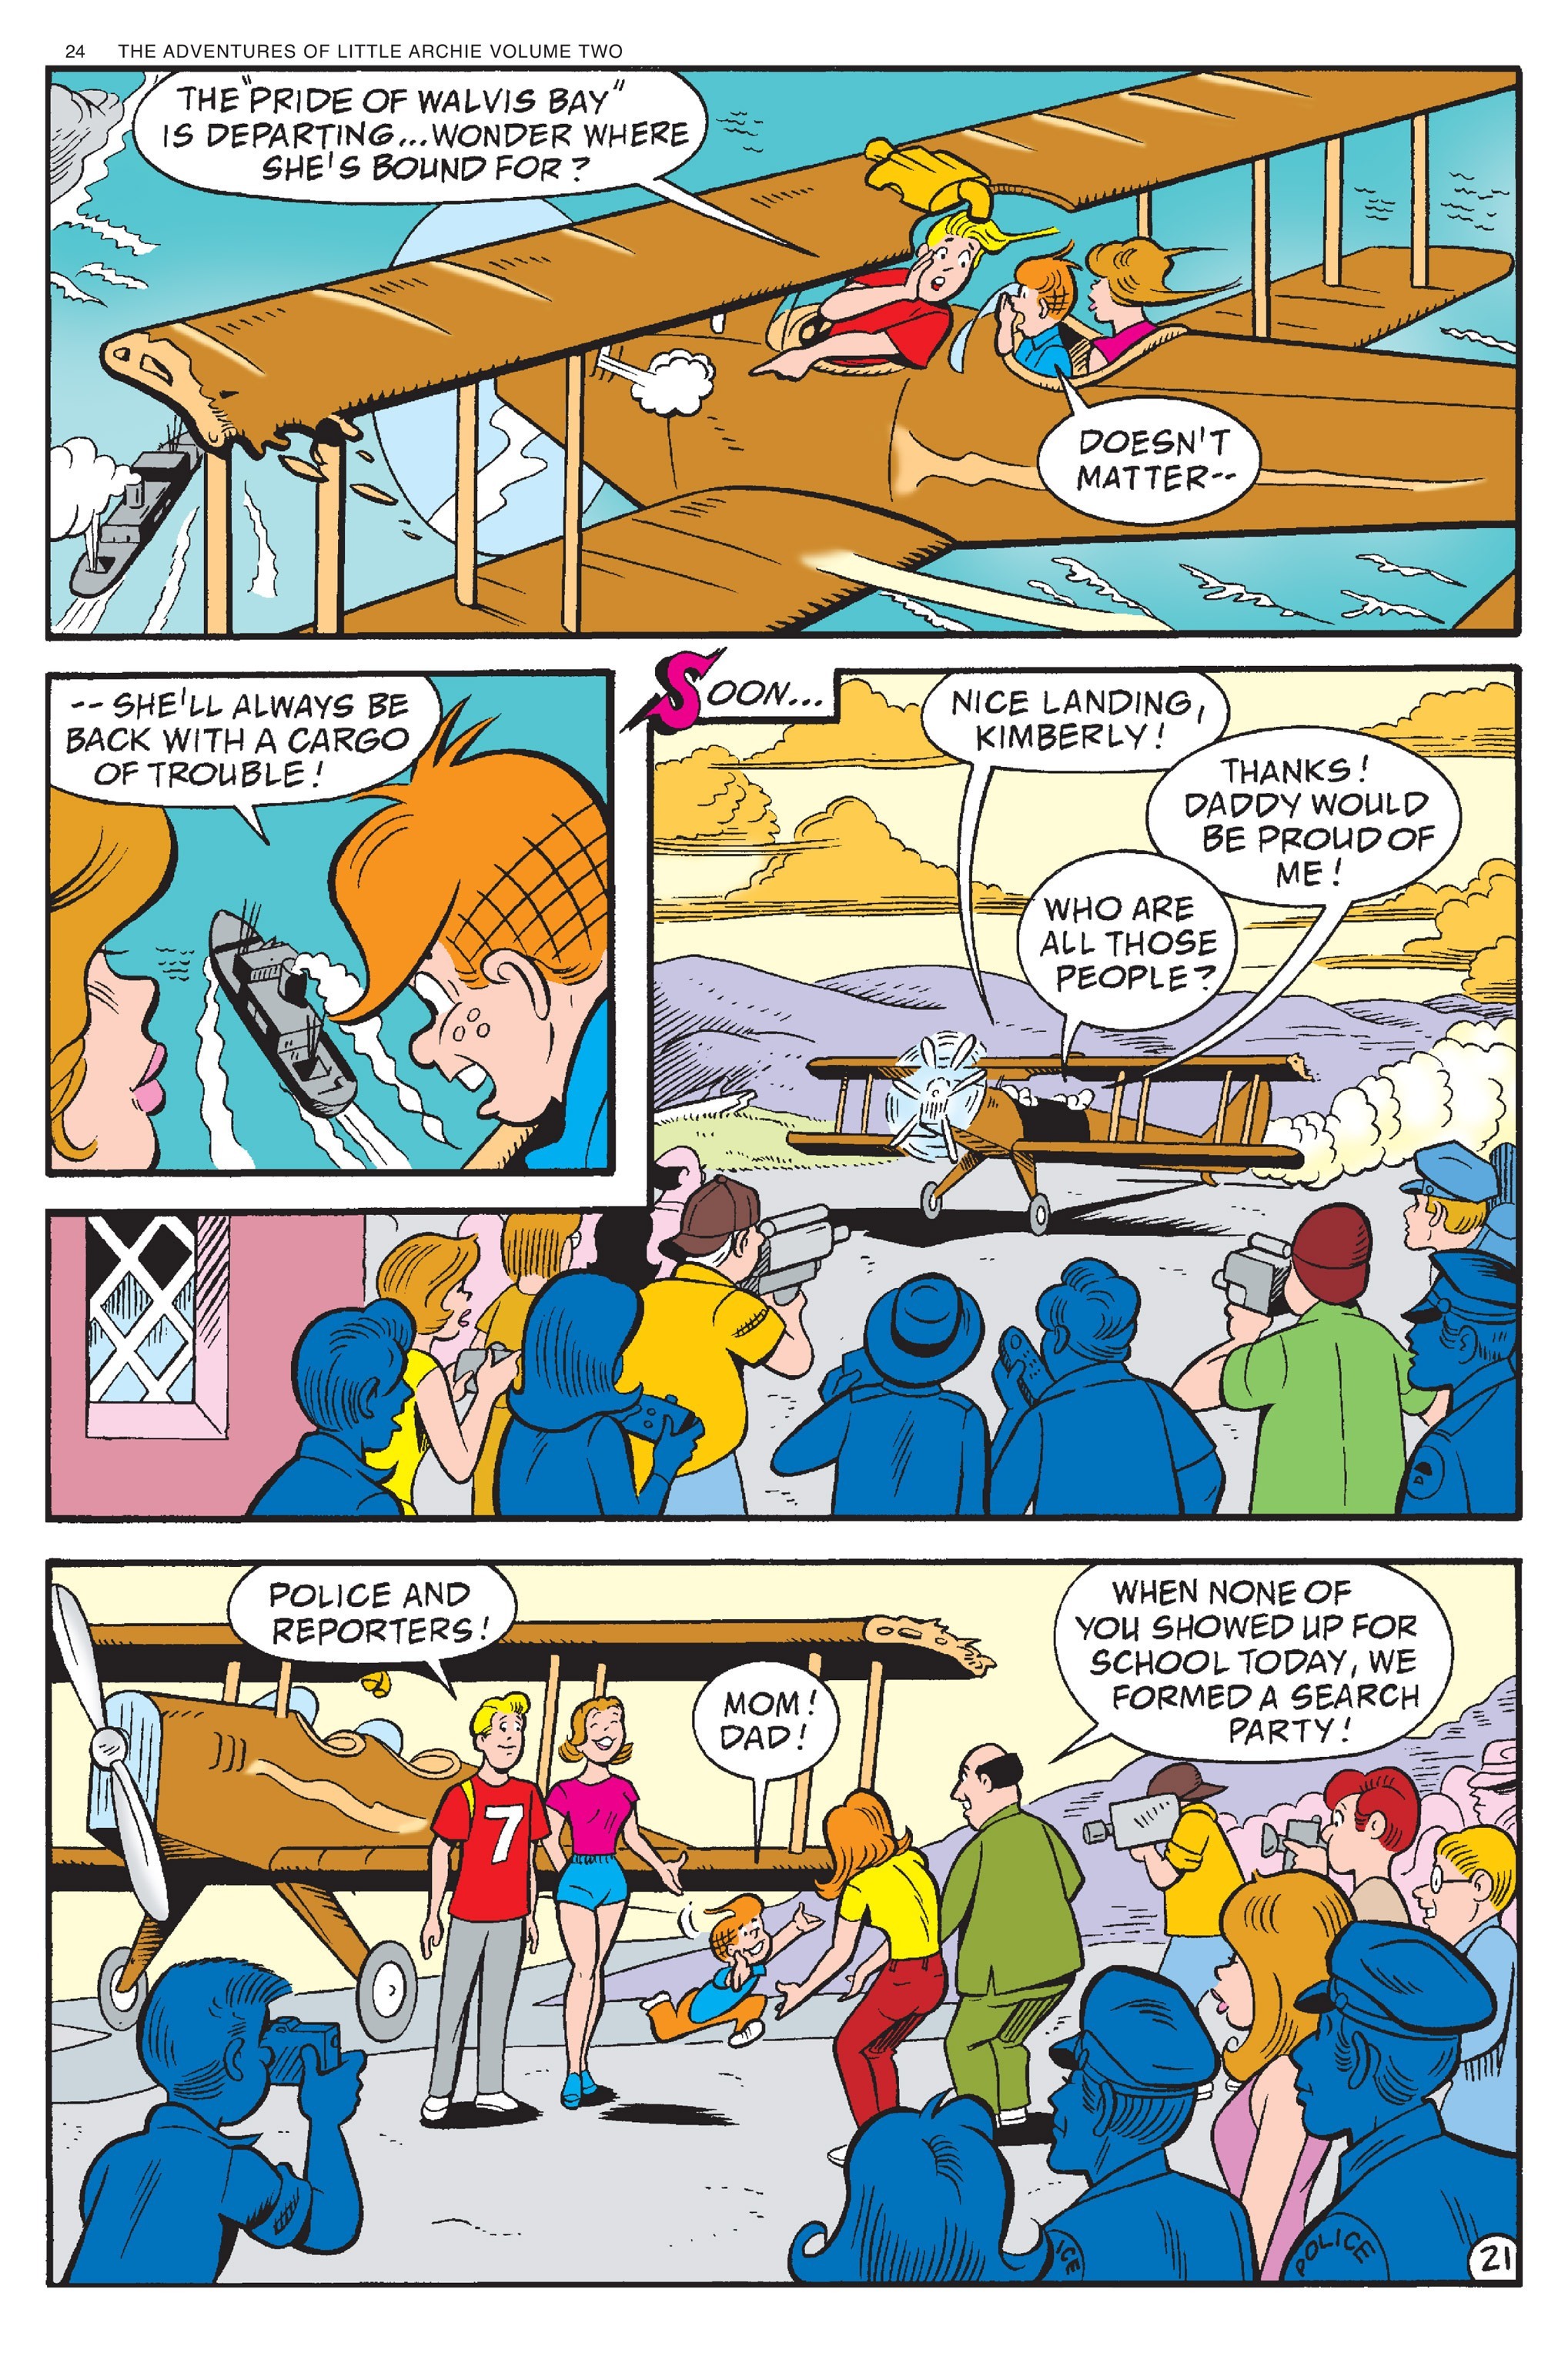 Read online Adventures of Little Archie comic -  Issue # TPB 2 - 25